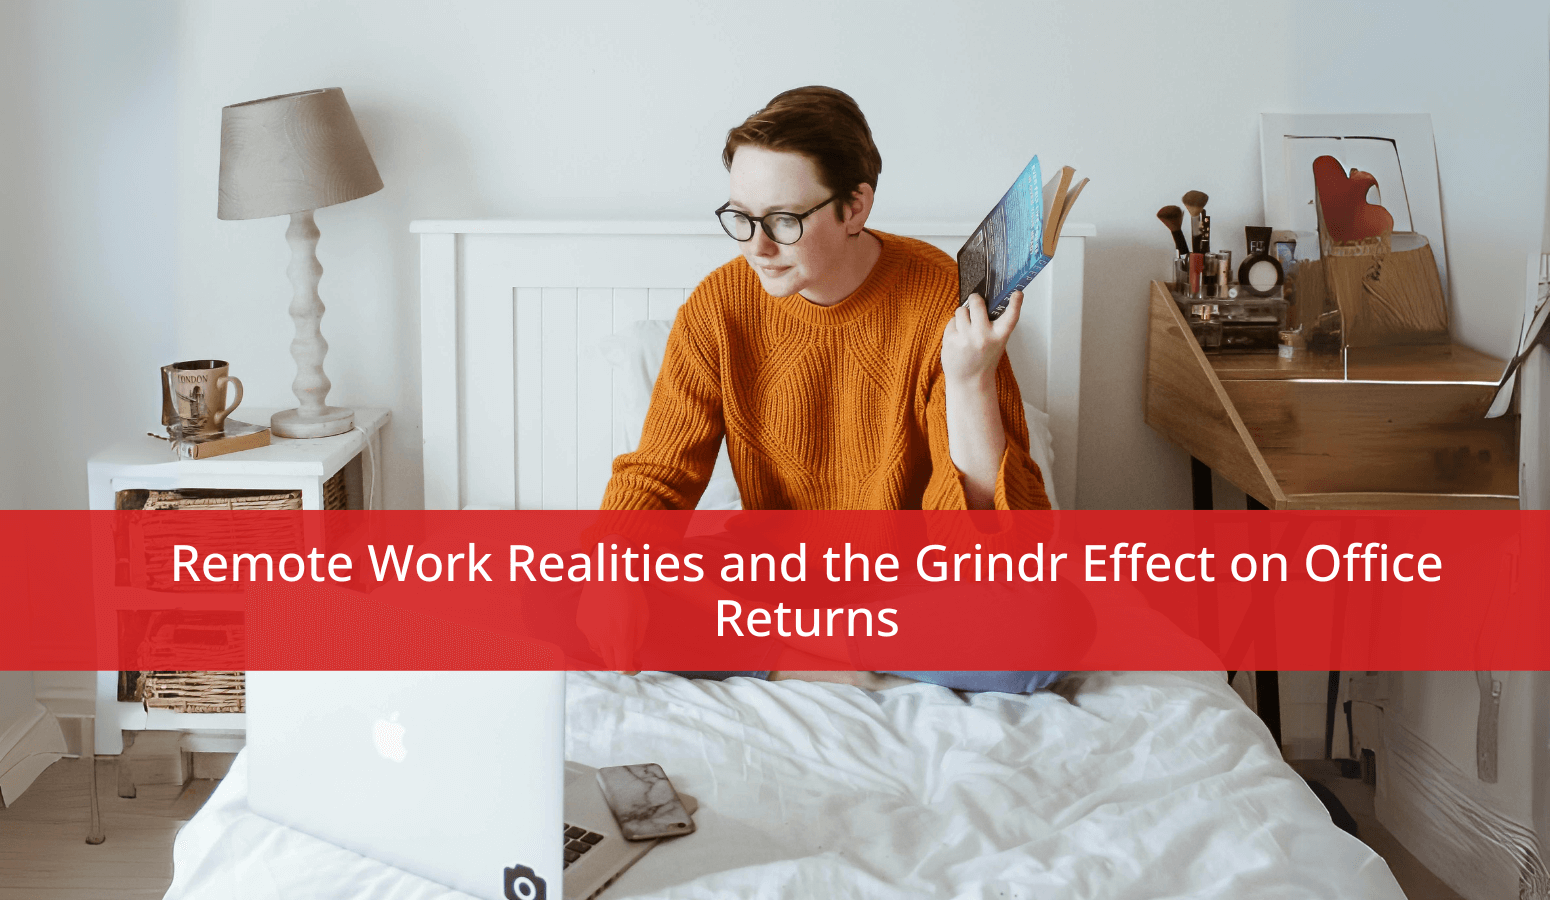 Featured image for “Remote Work Realities and the Grindr Effect on Office Returns”